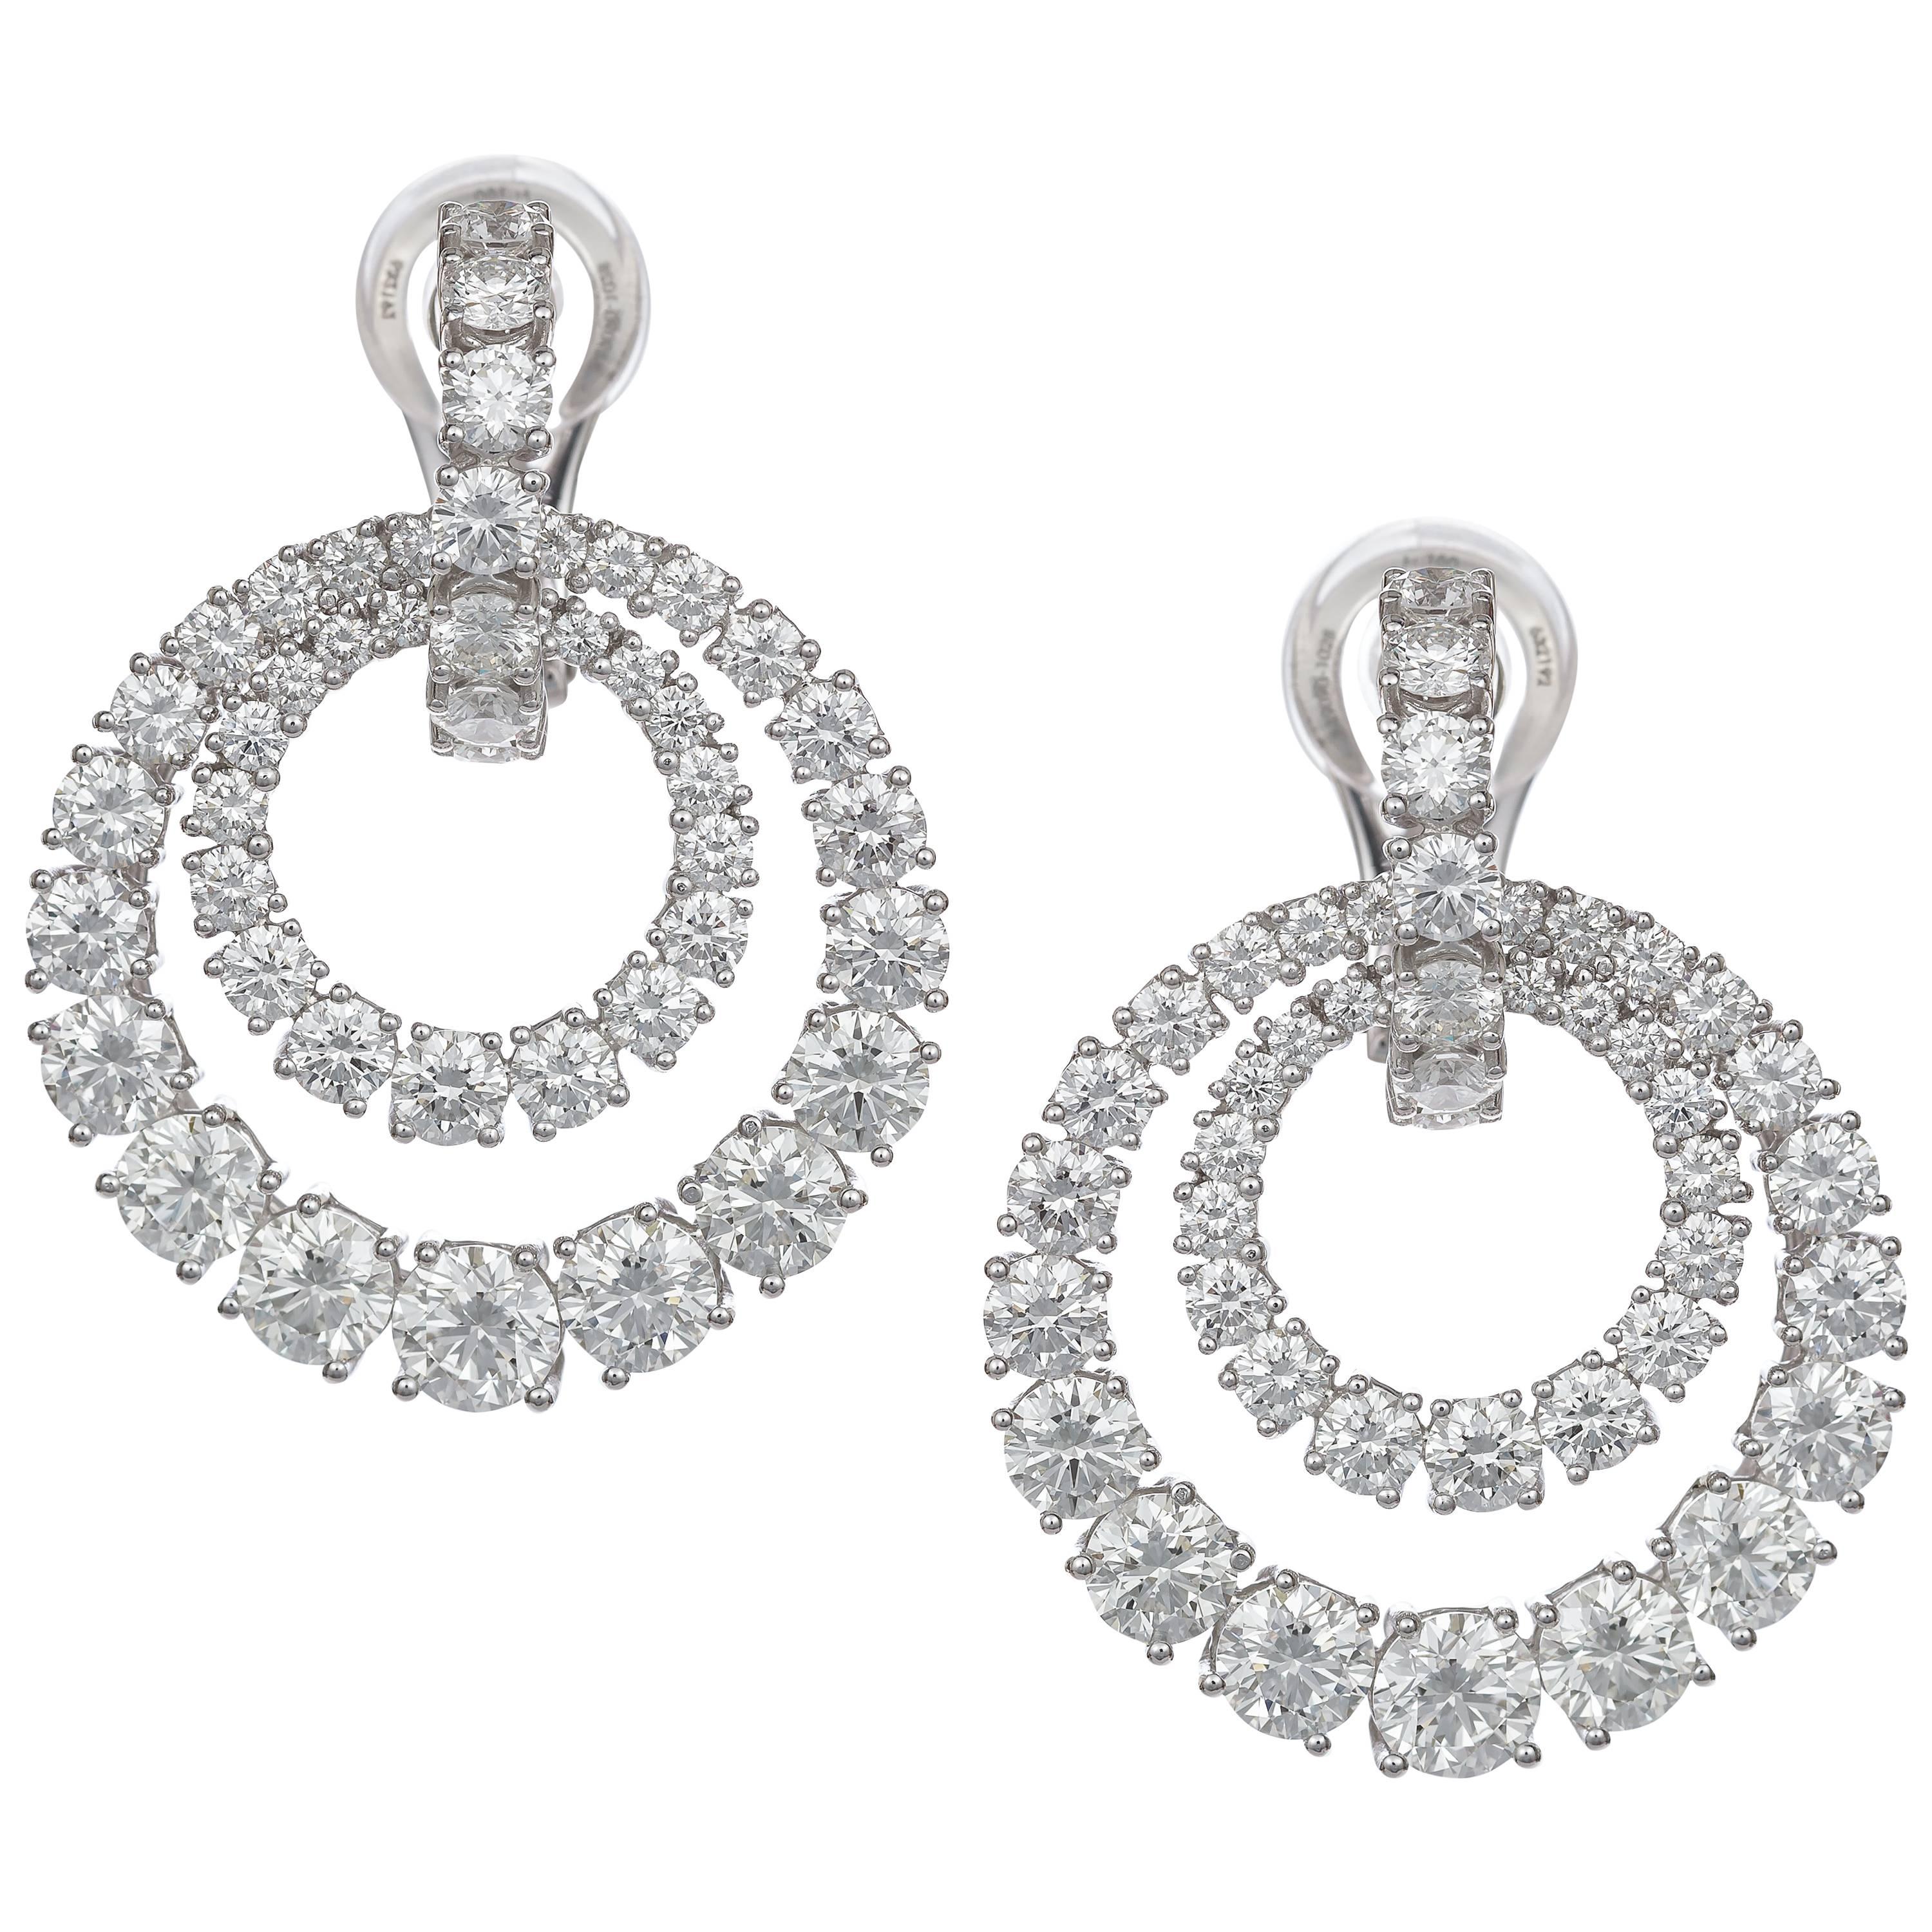 Chopard Diamond Earrings 18k White Gold and 9.40 ct. Round Brilliant Diamonds  For Sale